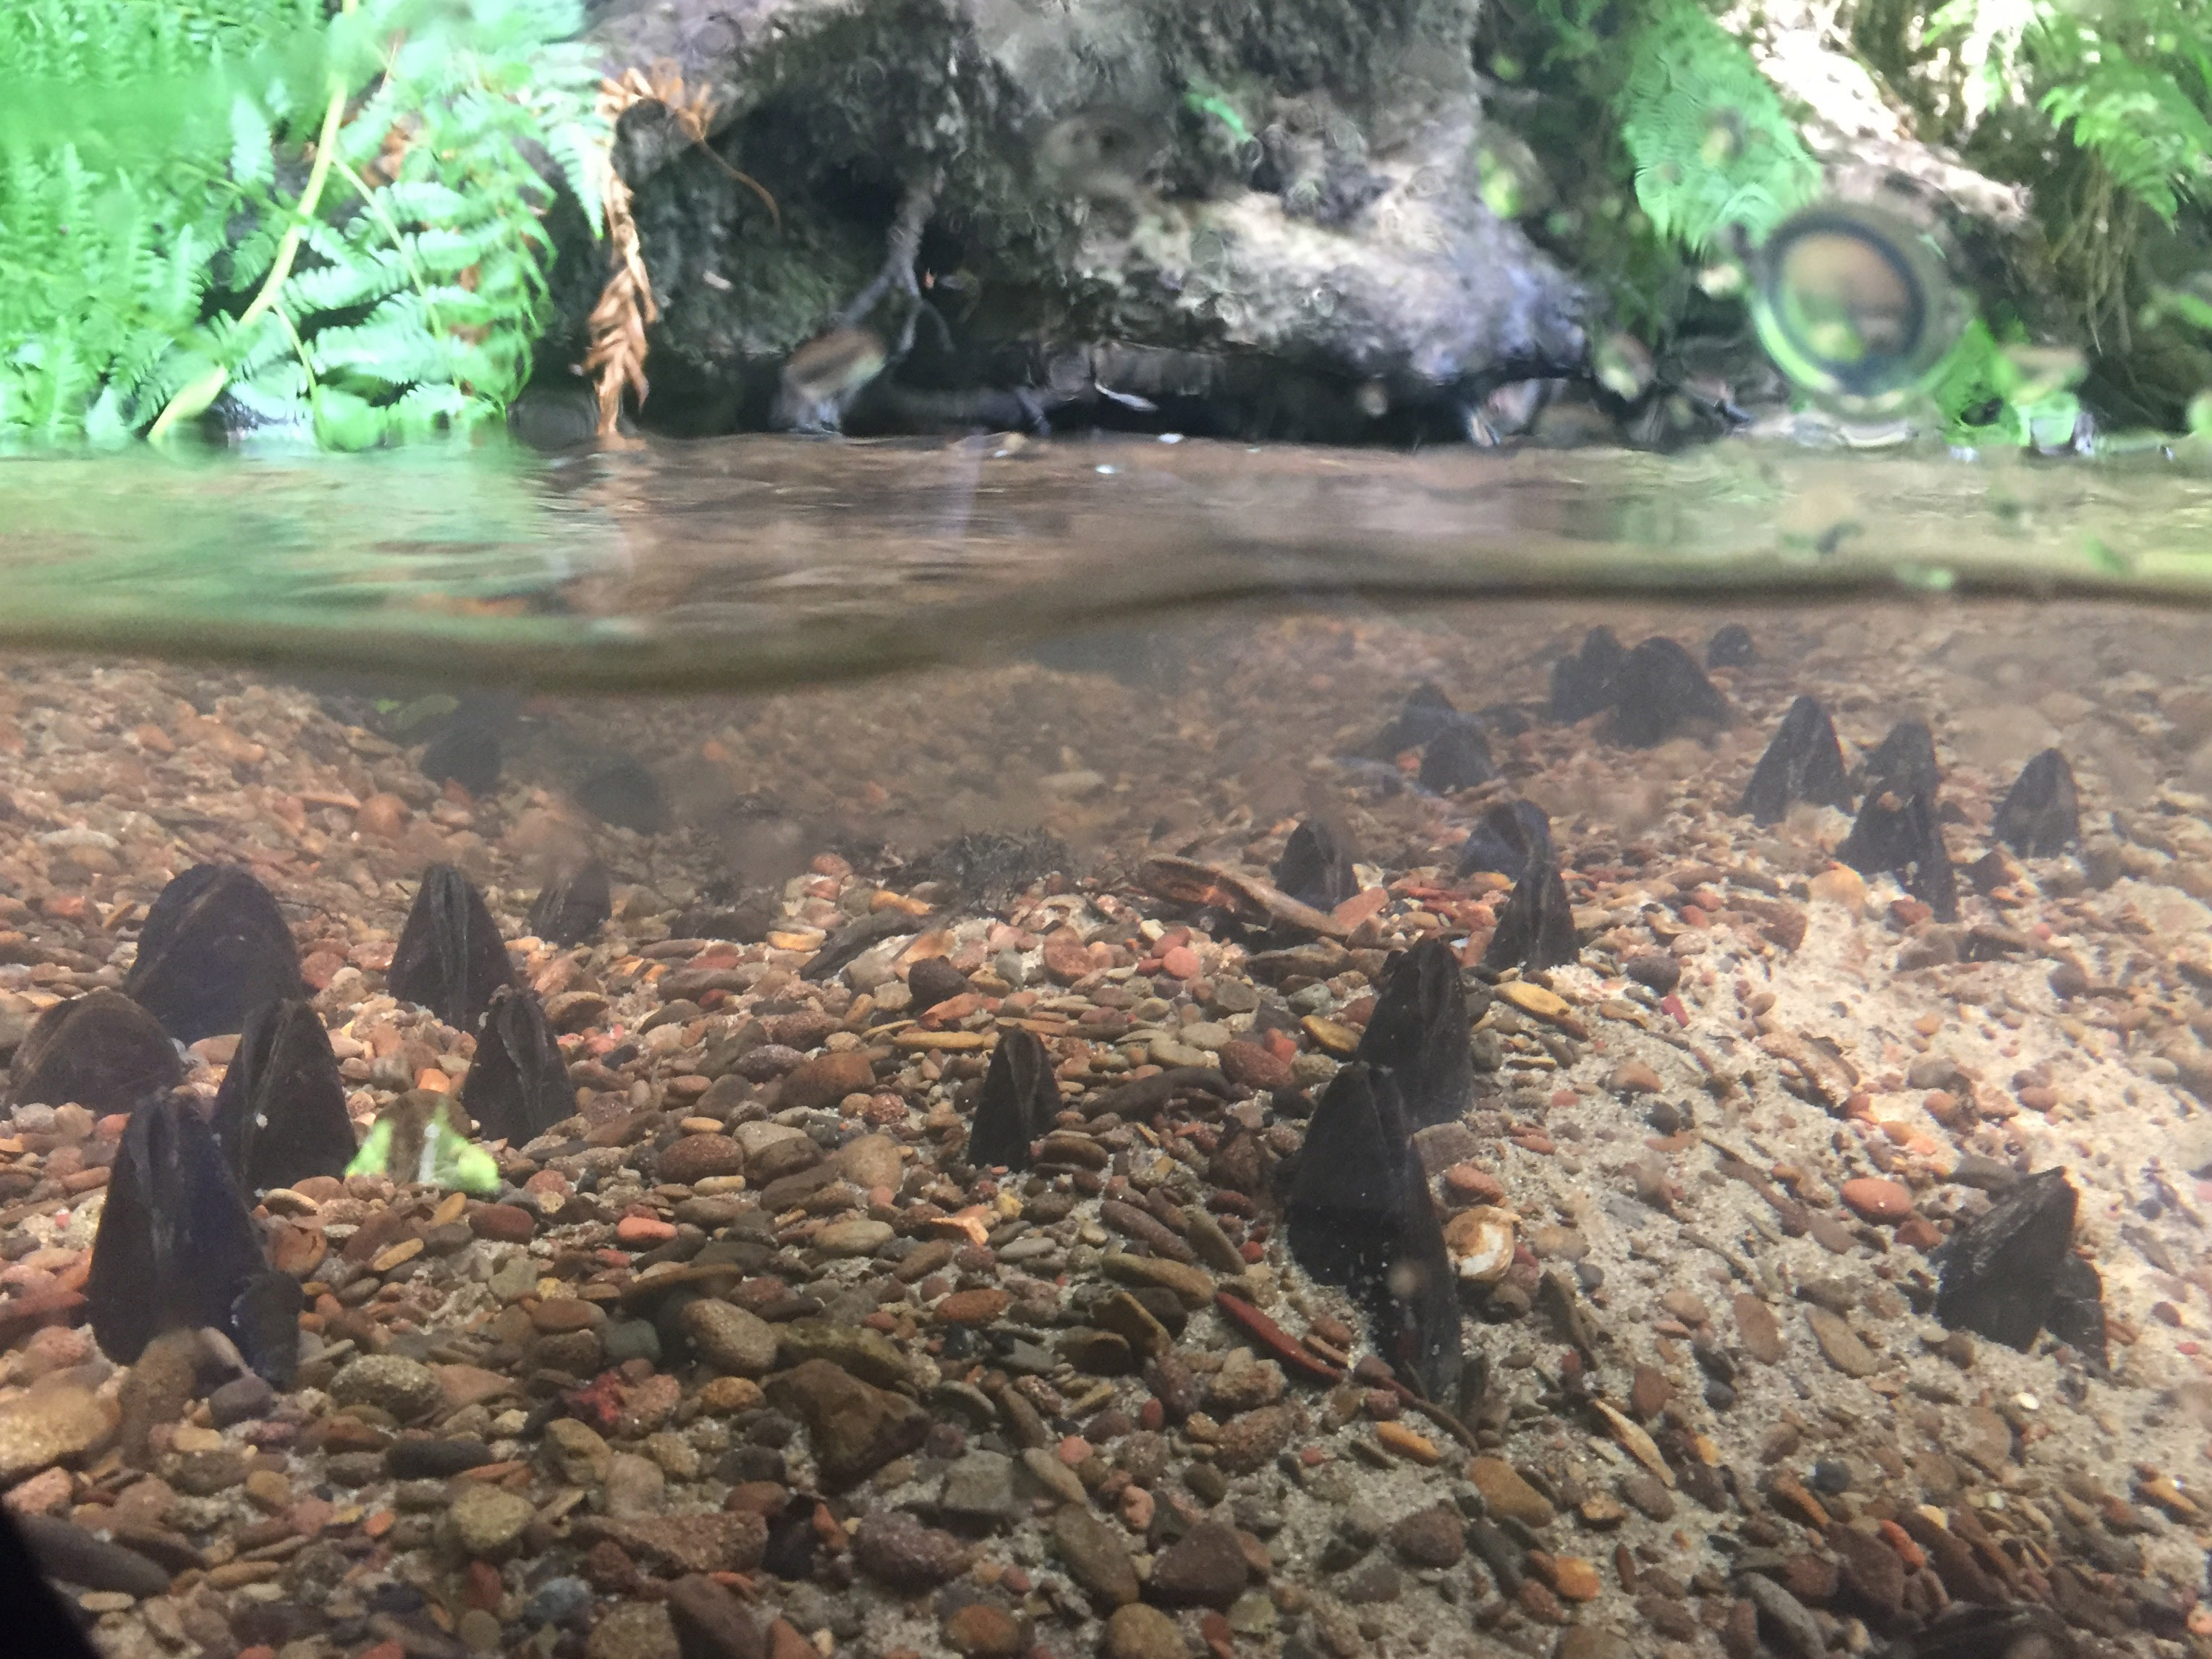 A view into a creek showing freshwater mussels under the water.